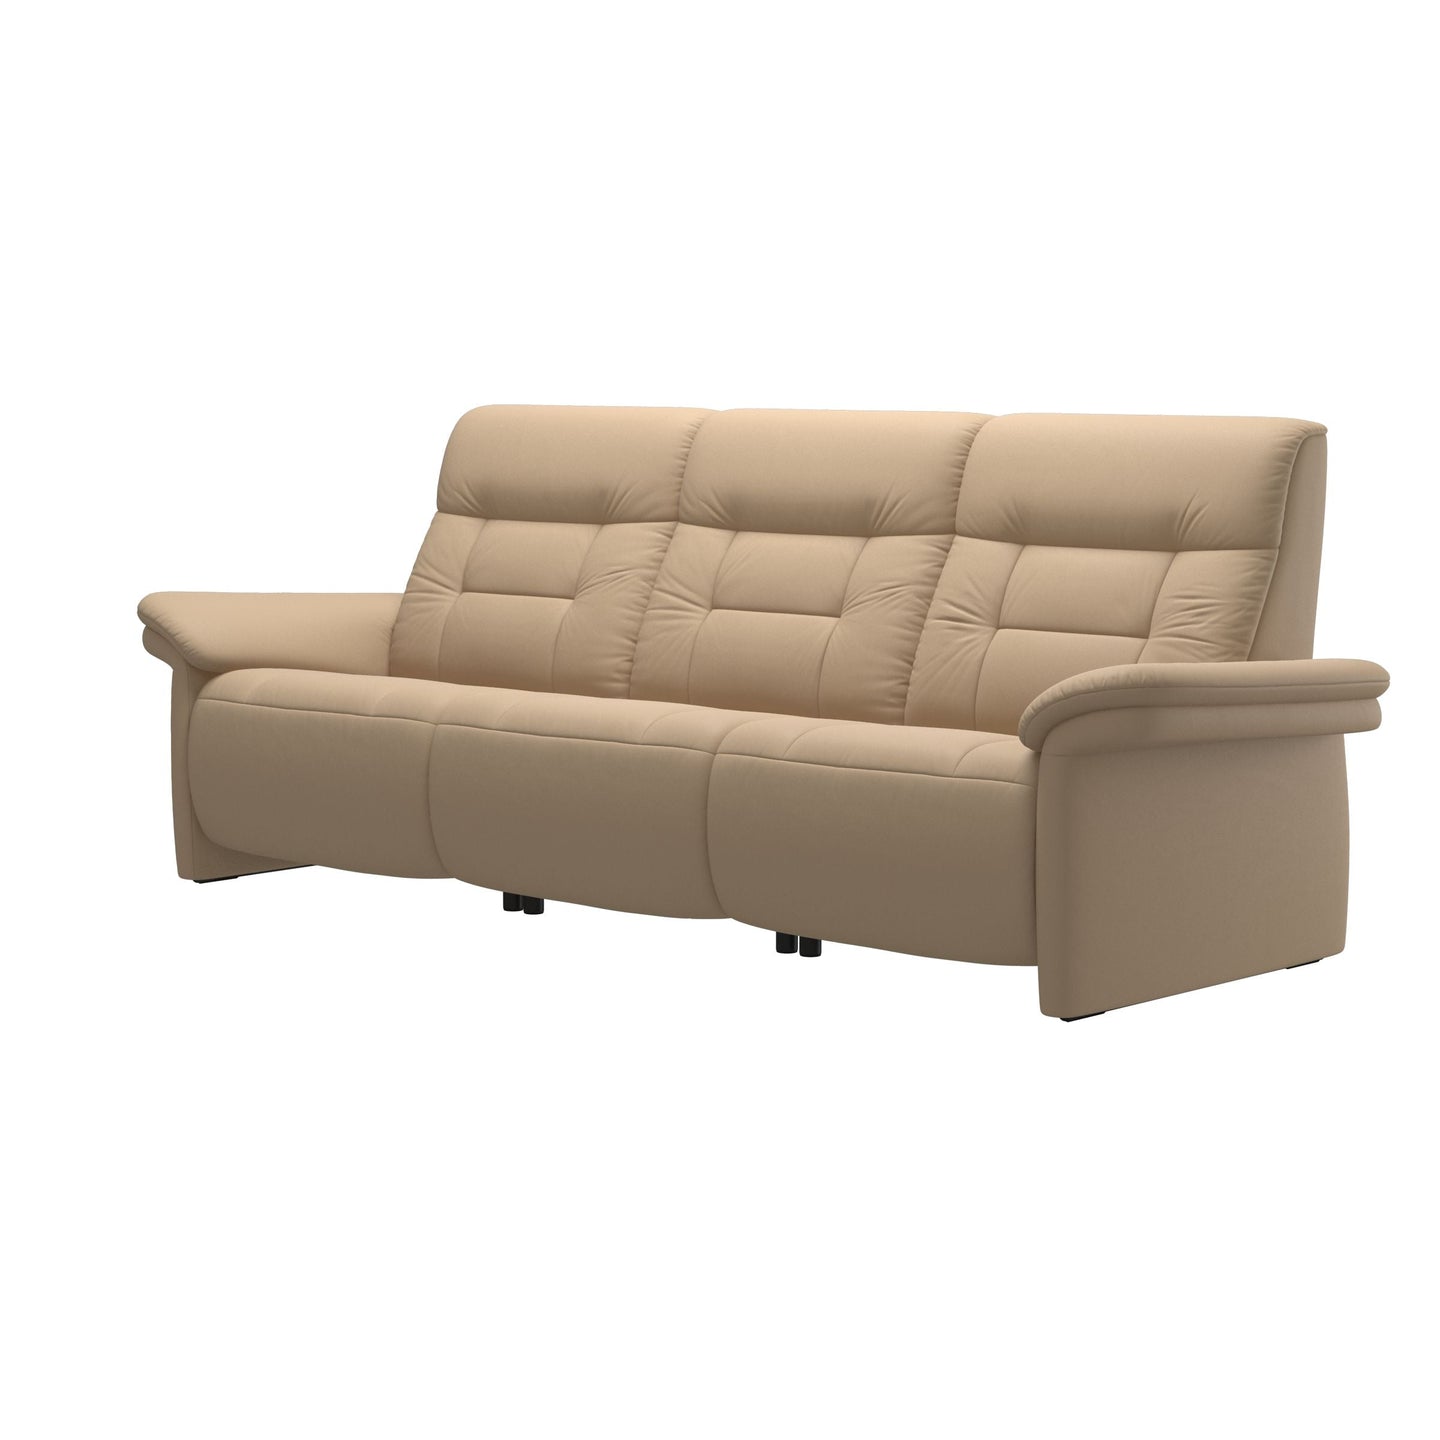 Stressless® Mary arm upholstered 3 seater